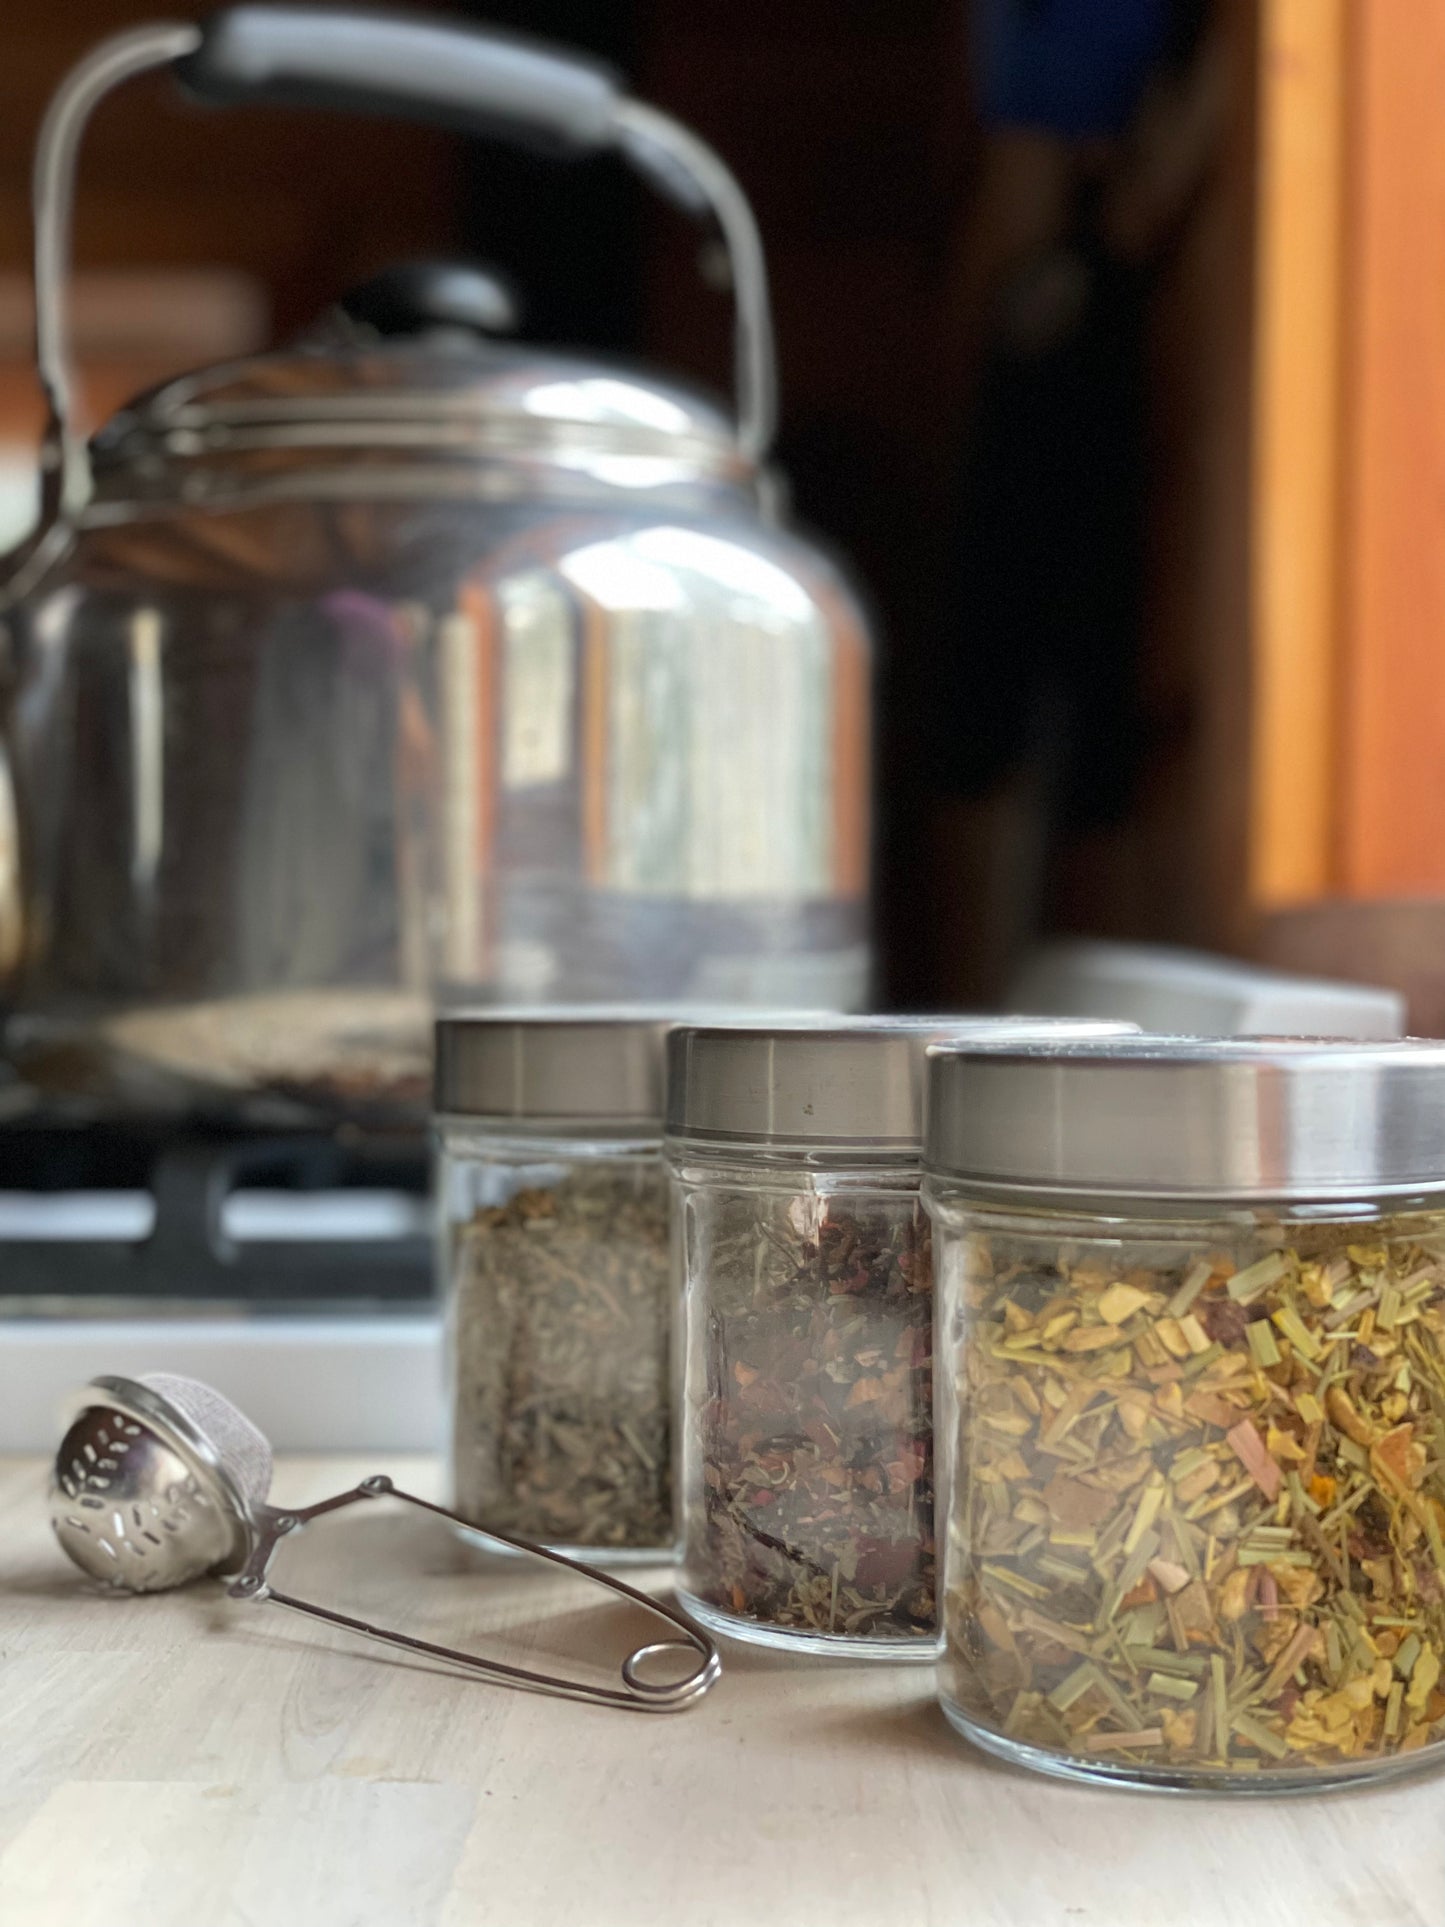 Blended teas and a kettle